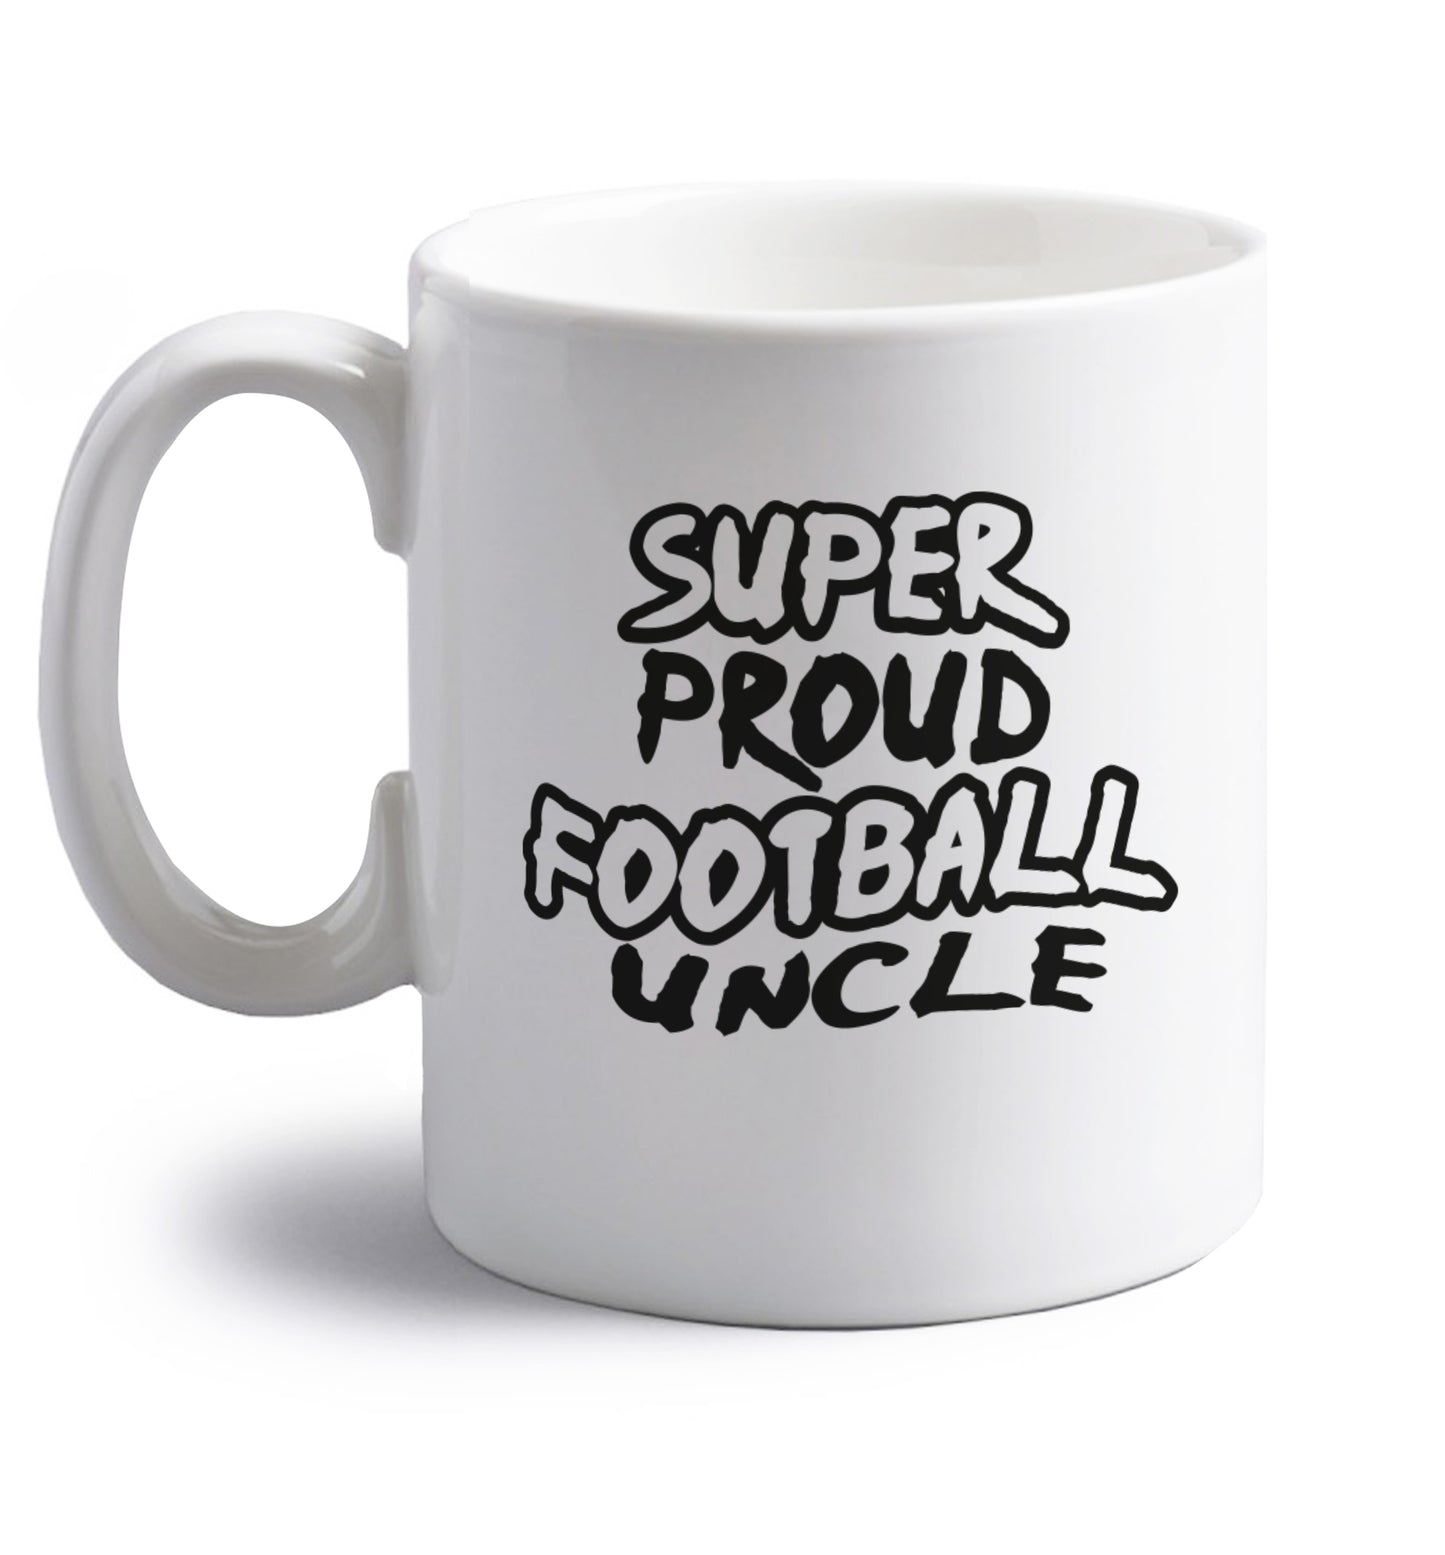 Super proud football uncle right handed white ceramic mug 